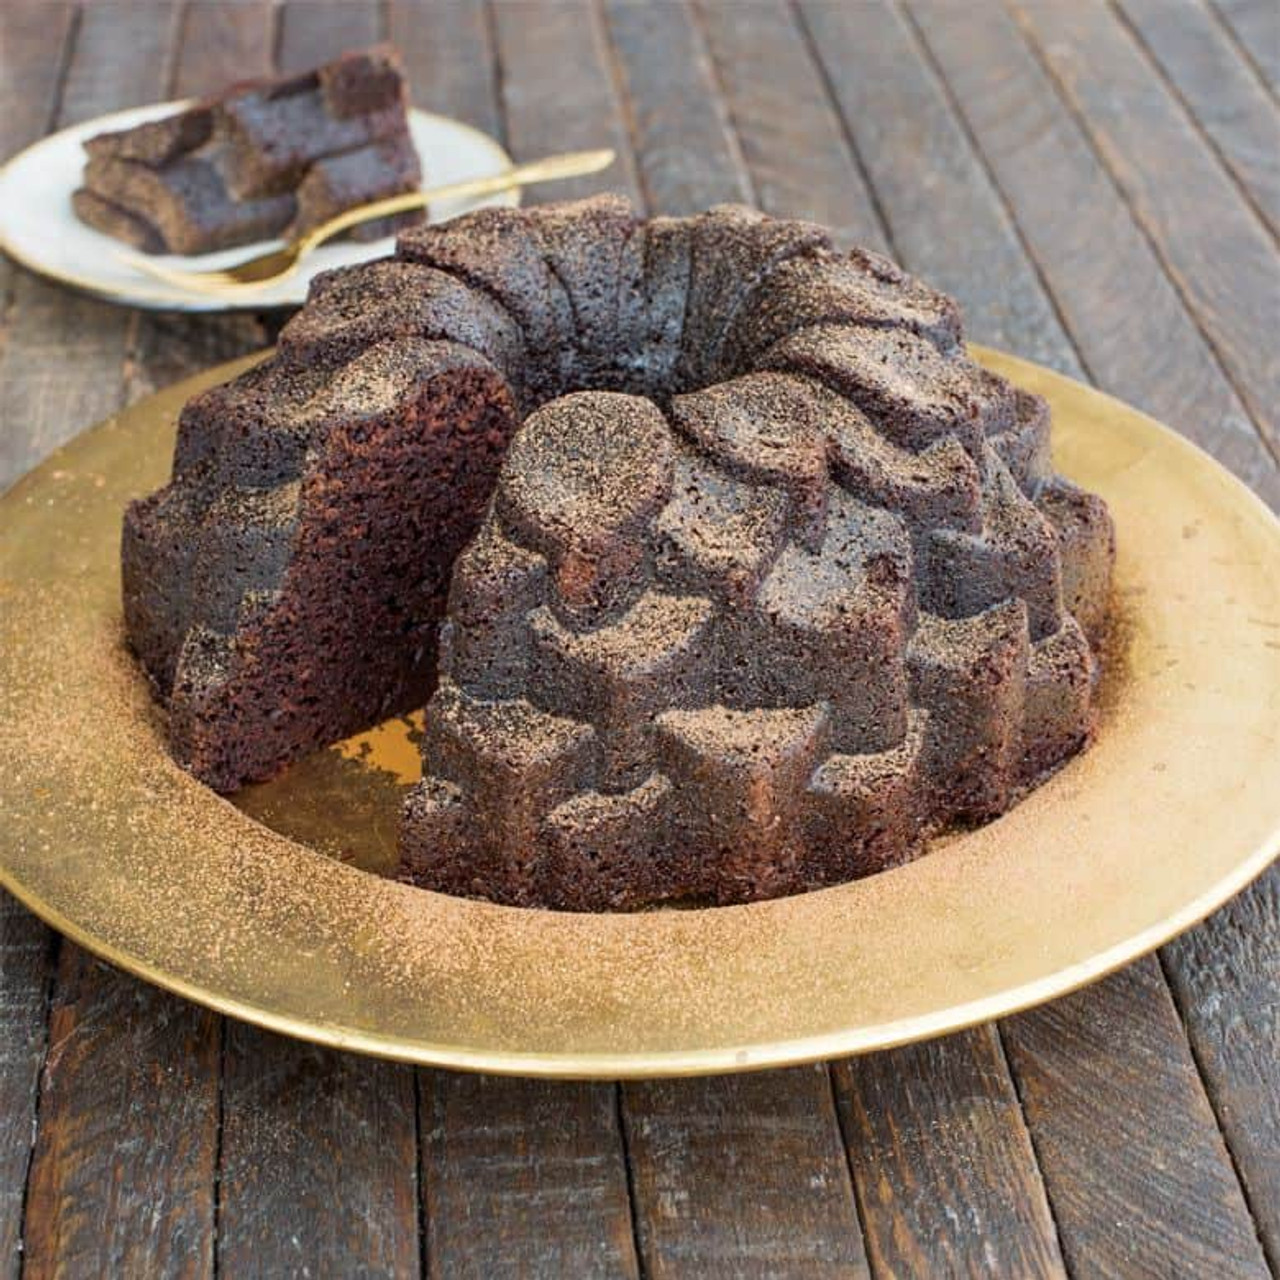 https://cdn11.bigcommerce.com/s-hccytny0od/images/stencil/1280x1280/products/735/3954/nordic-ware-blossom-bundt-pan-3__23936.1514638383.jpg?c=2?imbypass=on